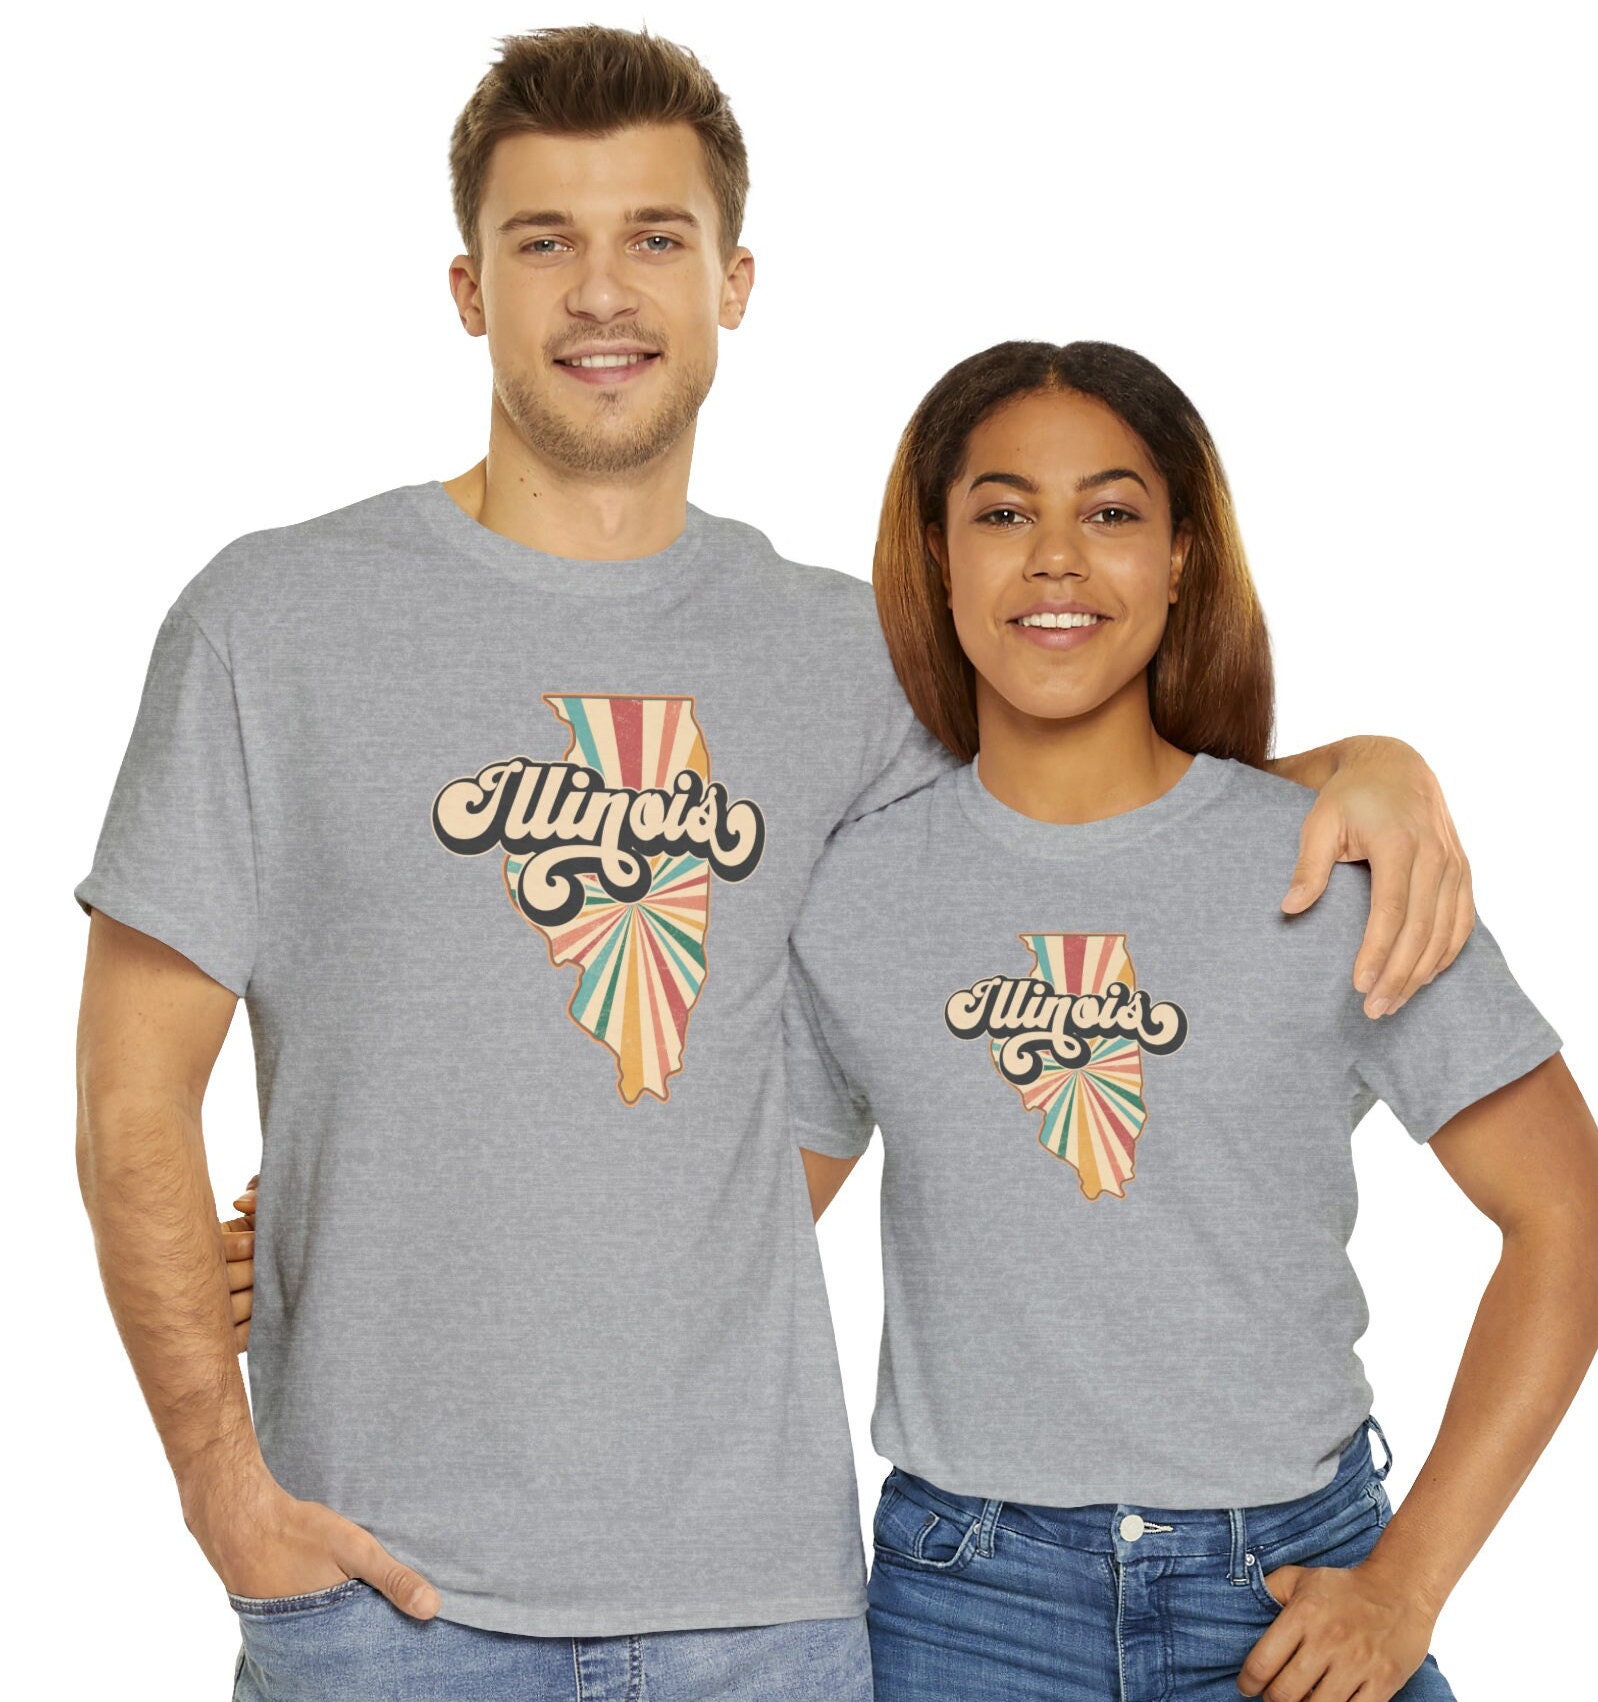 Discover State of Illinois Retro T-shirt, Cool Unisex Heavy Cotton Tee, Plus Sizes, Big and Tall